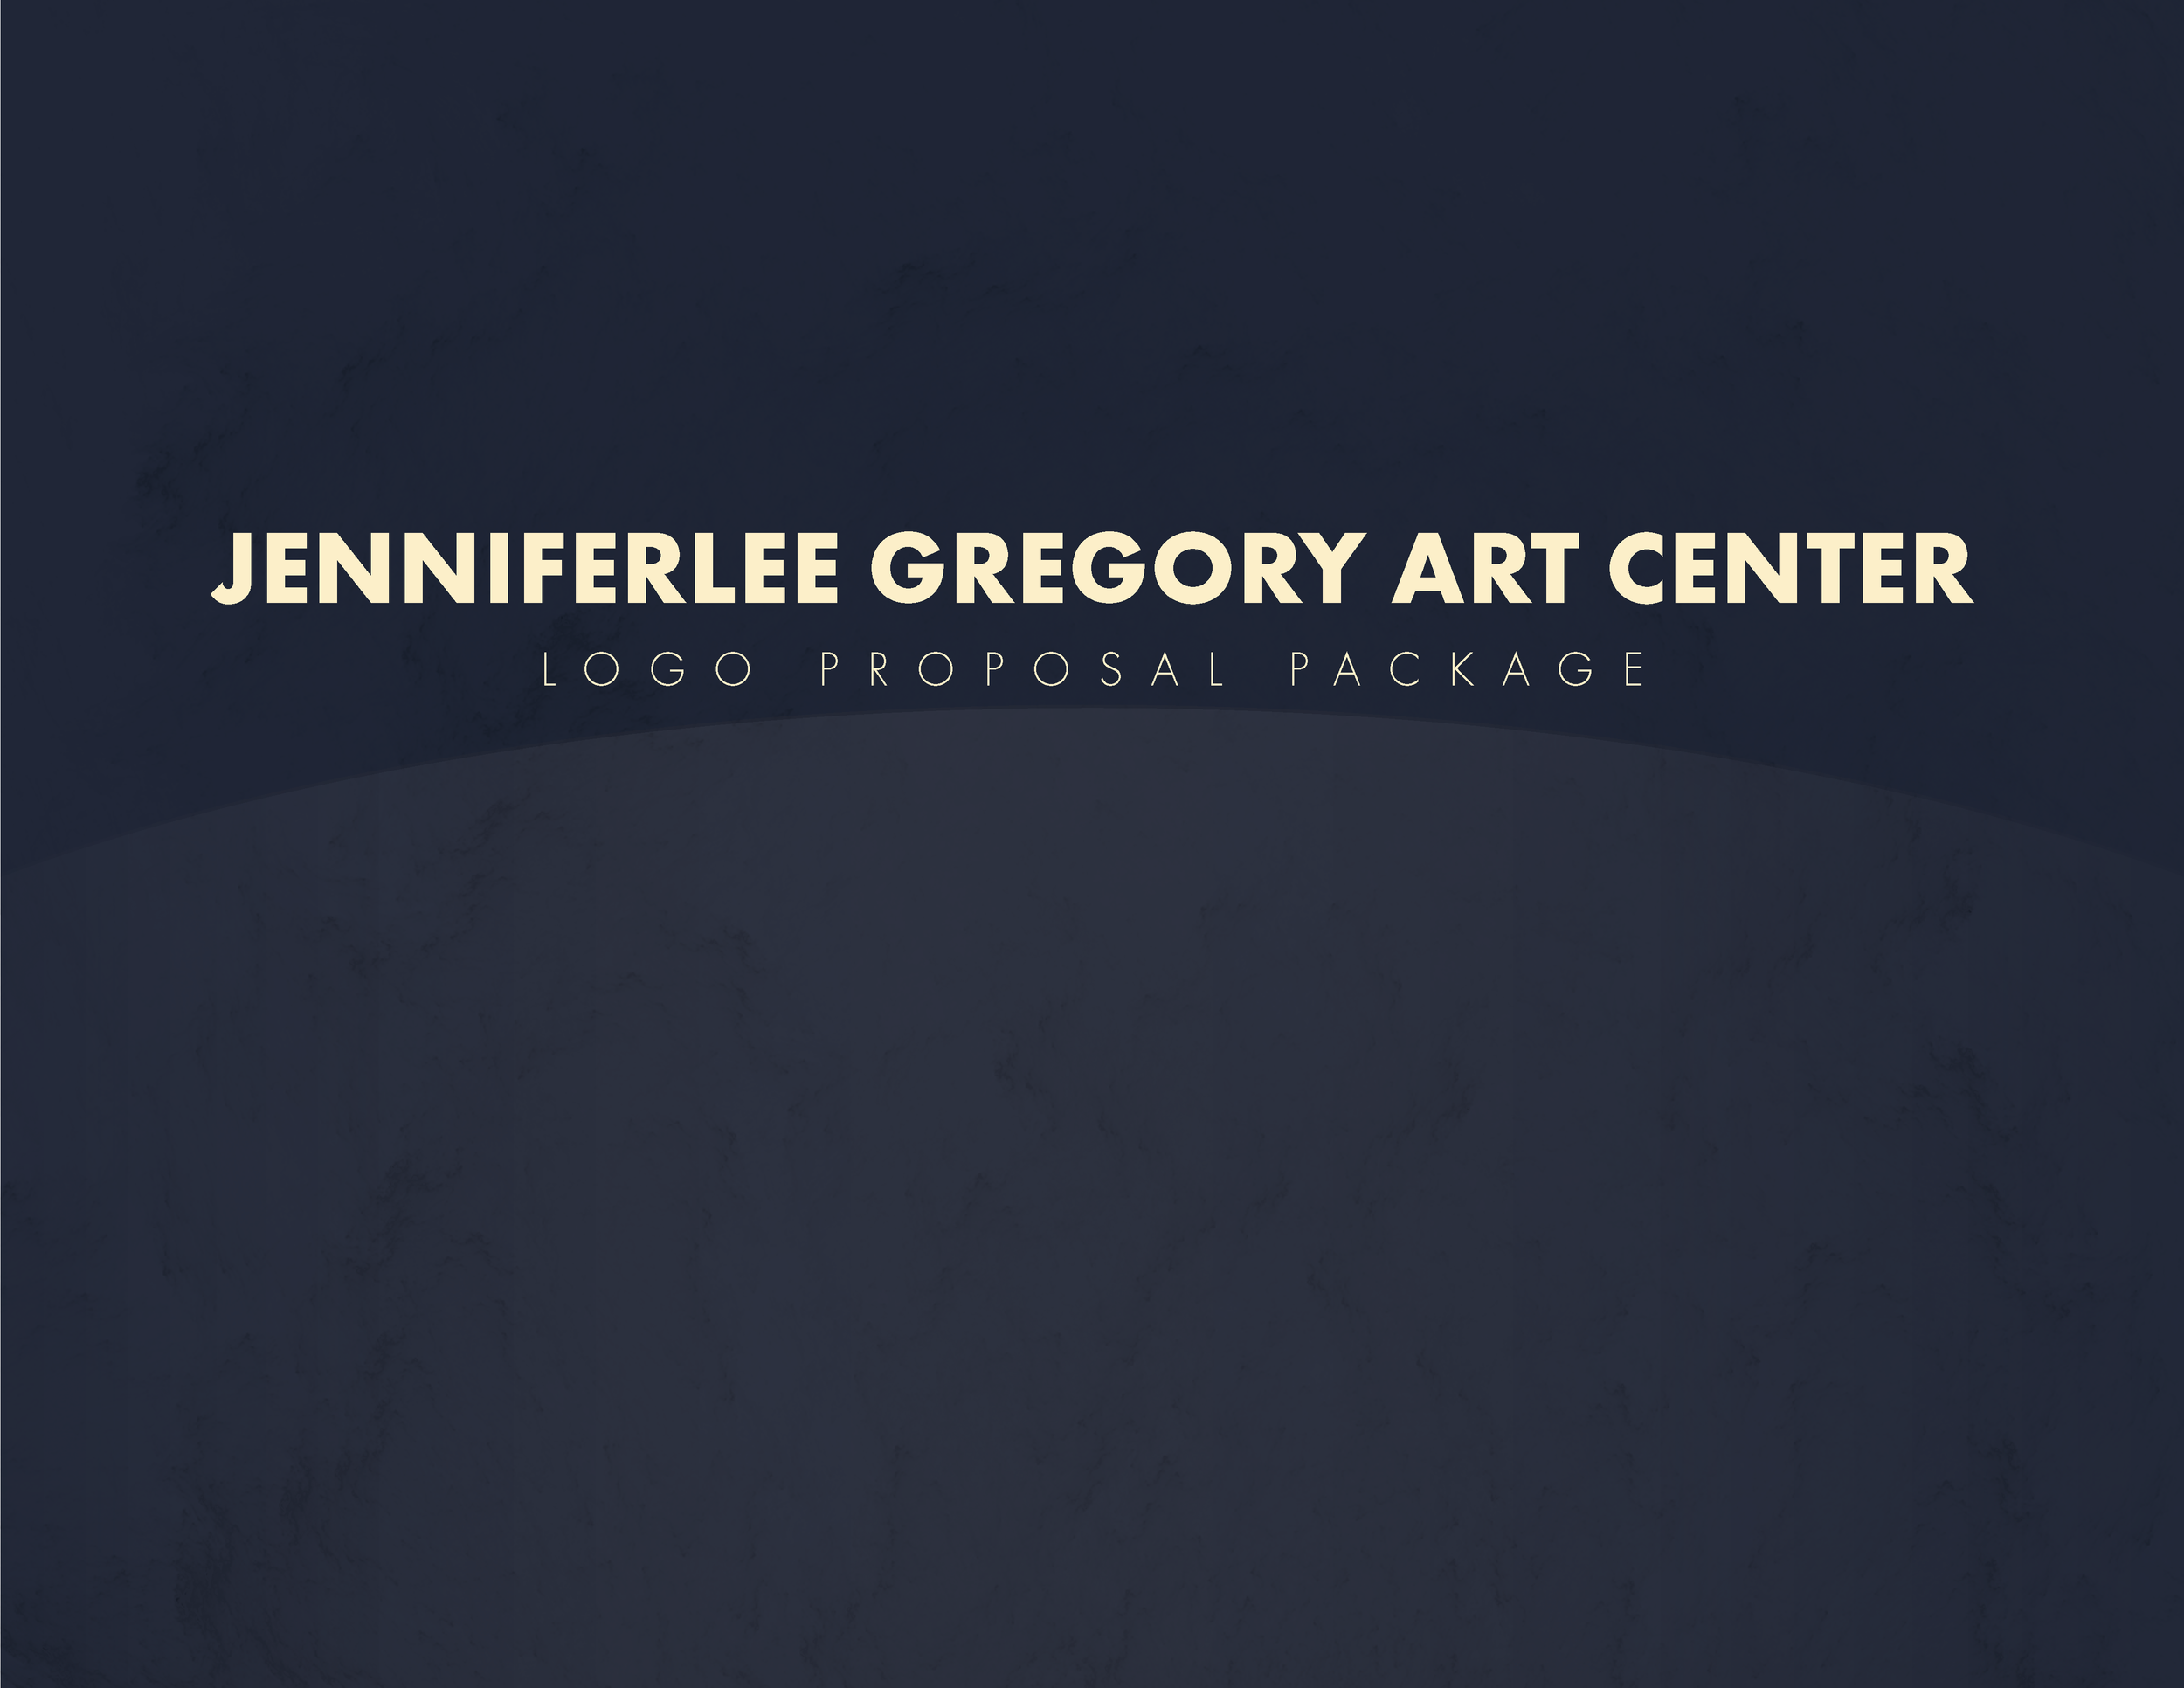 Logo Submission JLG Art Center_Page_1.png